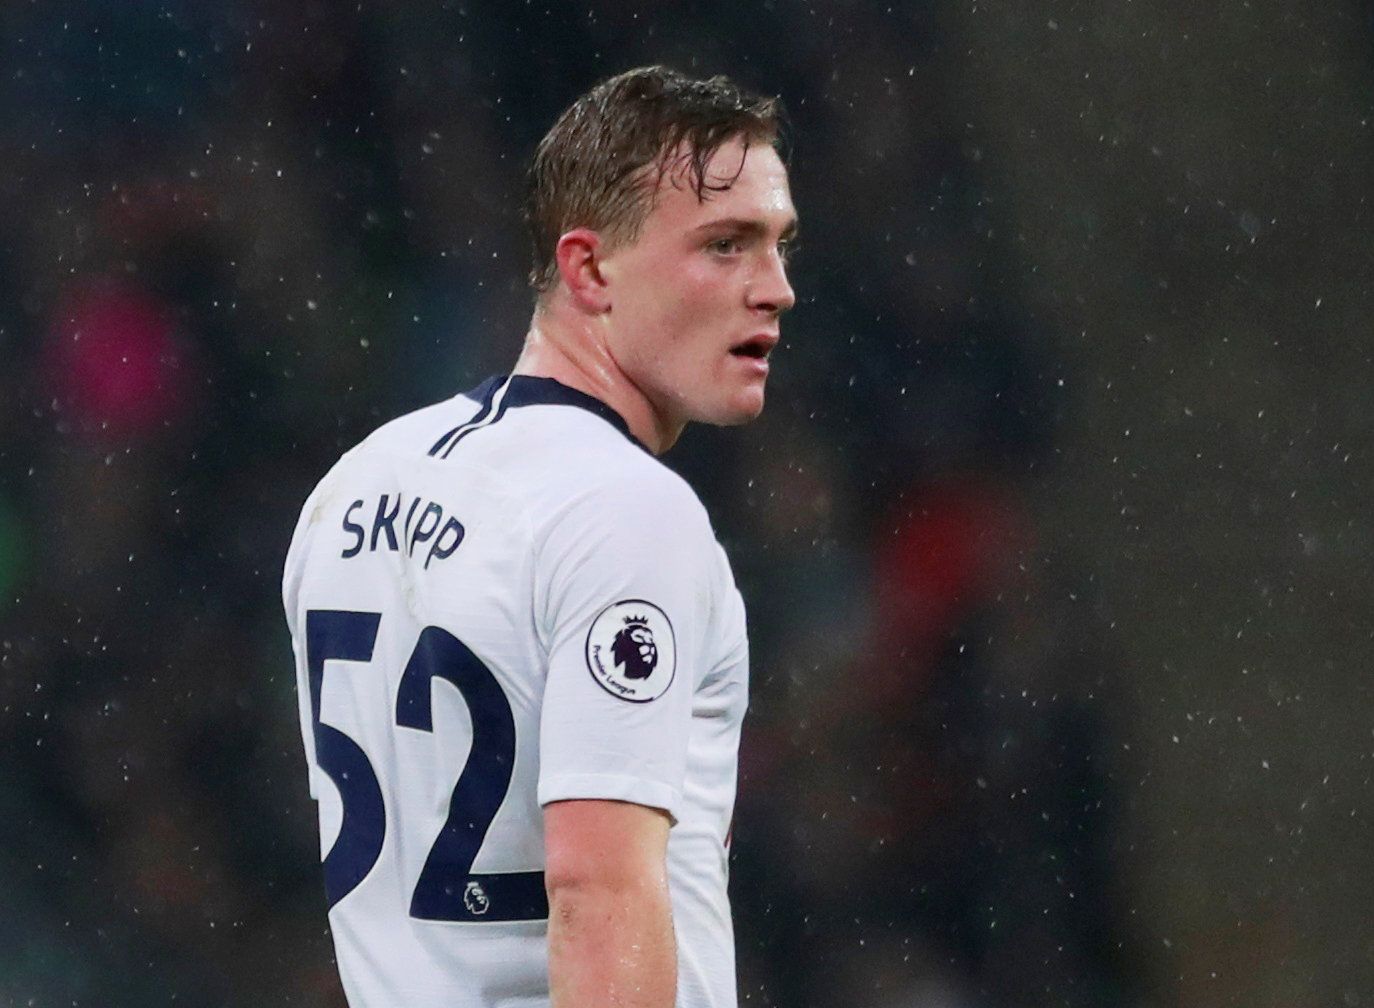 Soccer Football - Premier League - Tottenham Hotspur v Burnley - Wembley Stadium, London, Britain - December 15, 2018  Tottenham's Oliver Skipp during the match   Action Images via Reuters/Andrew Couldridge  EDITORIAL USE ONLY. No use with unauthorized audio, video, data, fixture lists, club/league logos or 